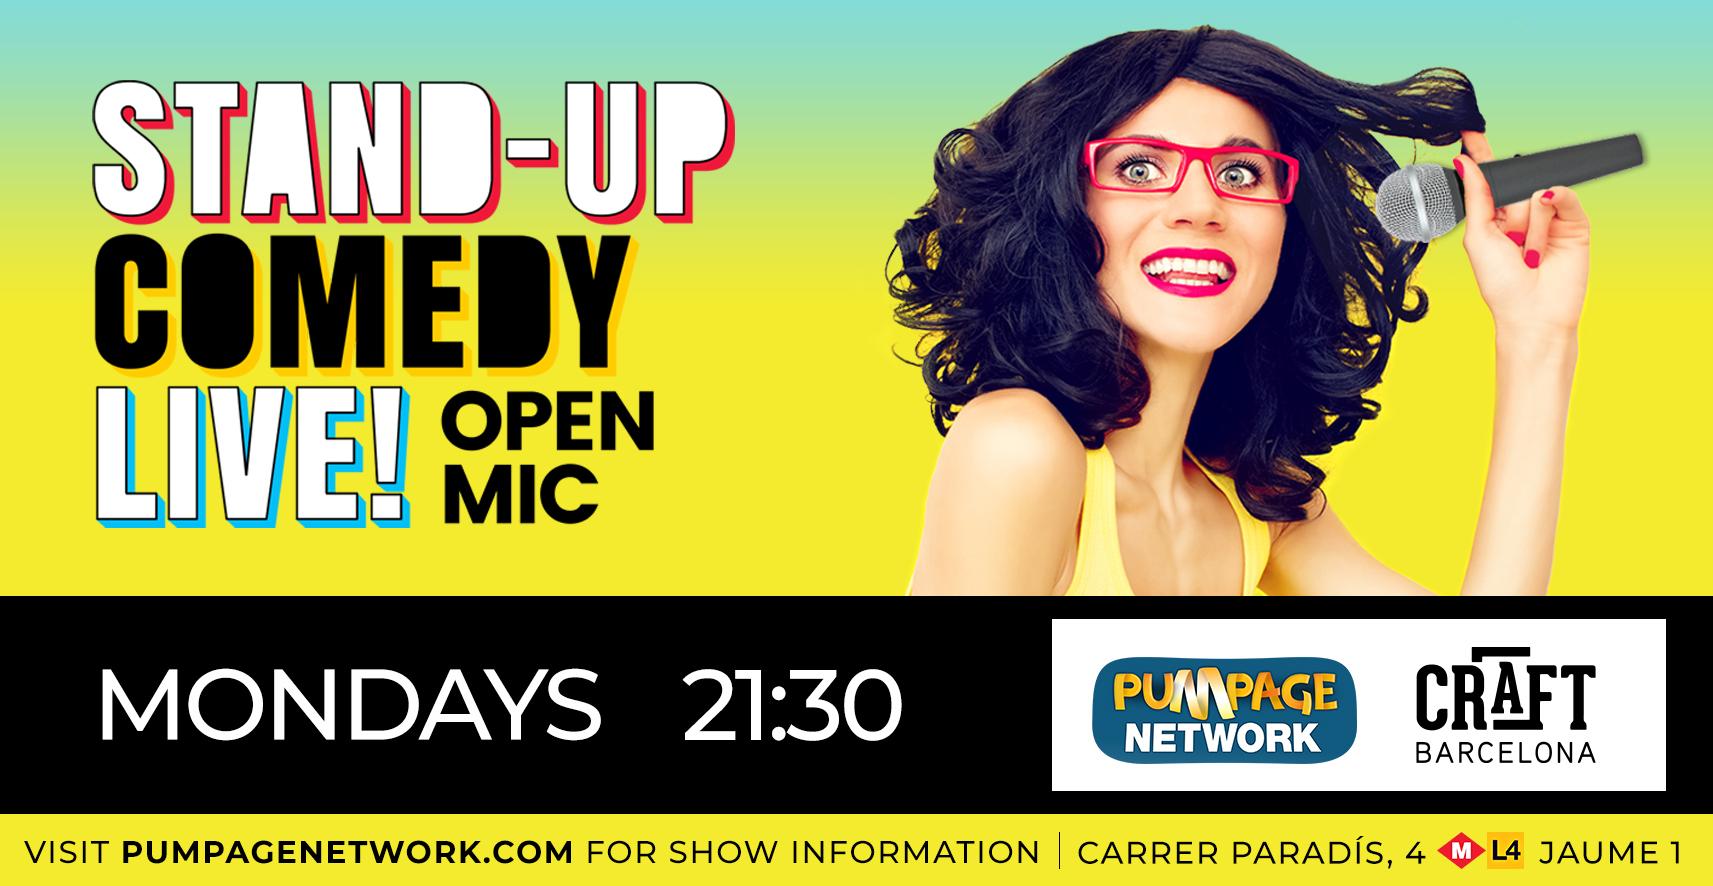 Stand-up Comedy Live! Open Mic